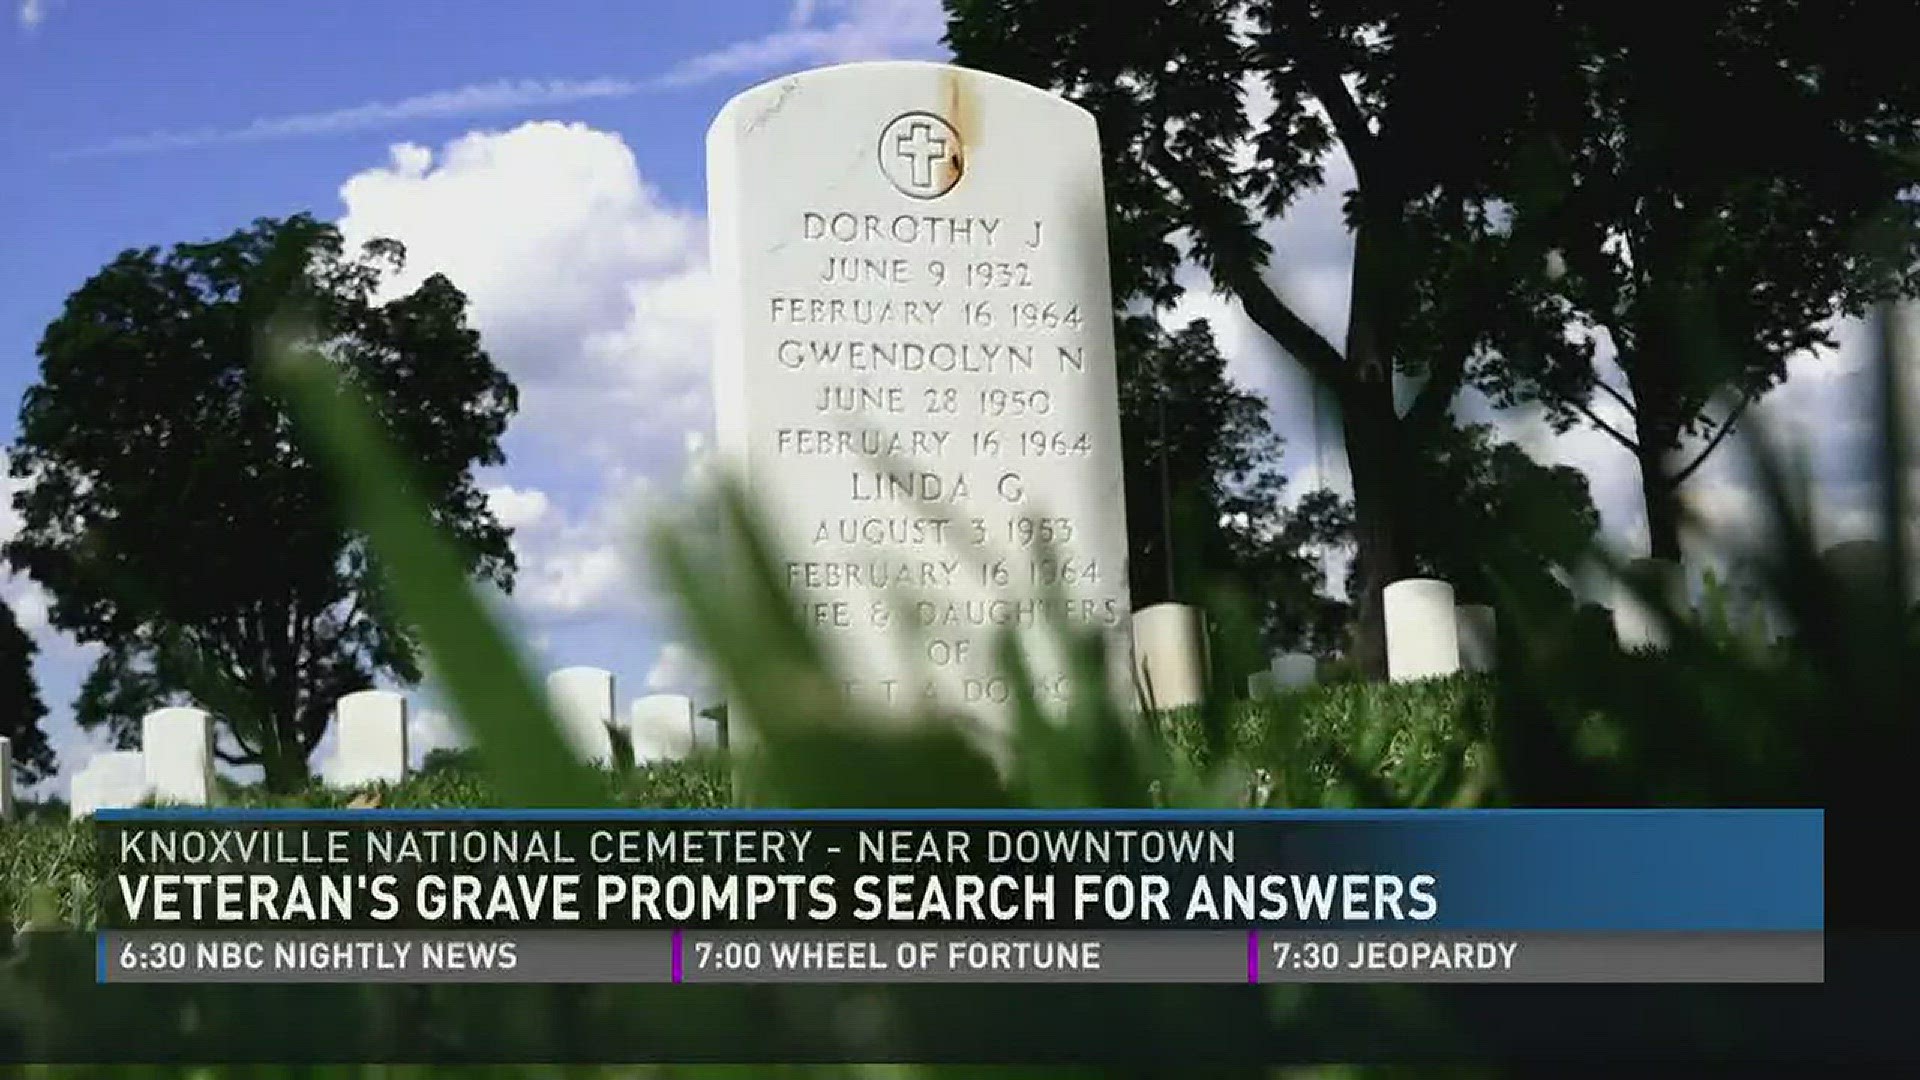 July 3, 3017: A grave marker for nearly an entire family caught an Anderson County woman's attention, and lead her to search for the story behind the stone.